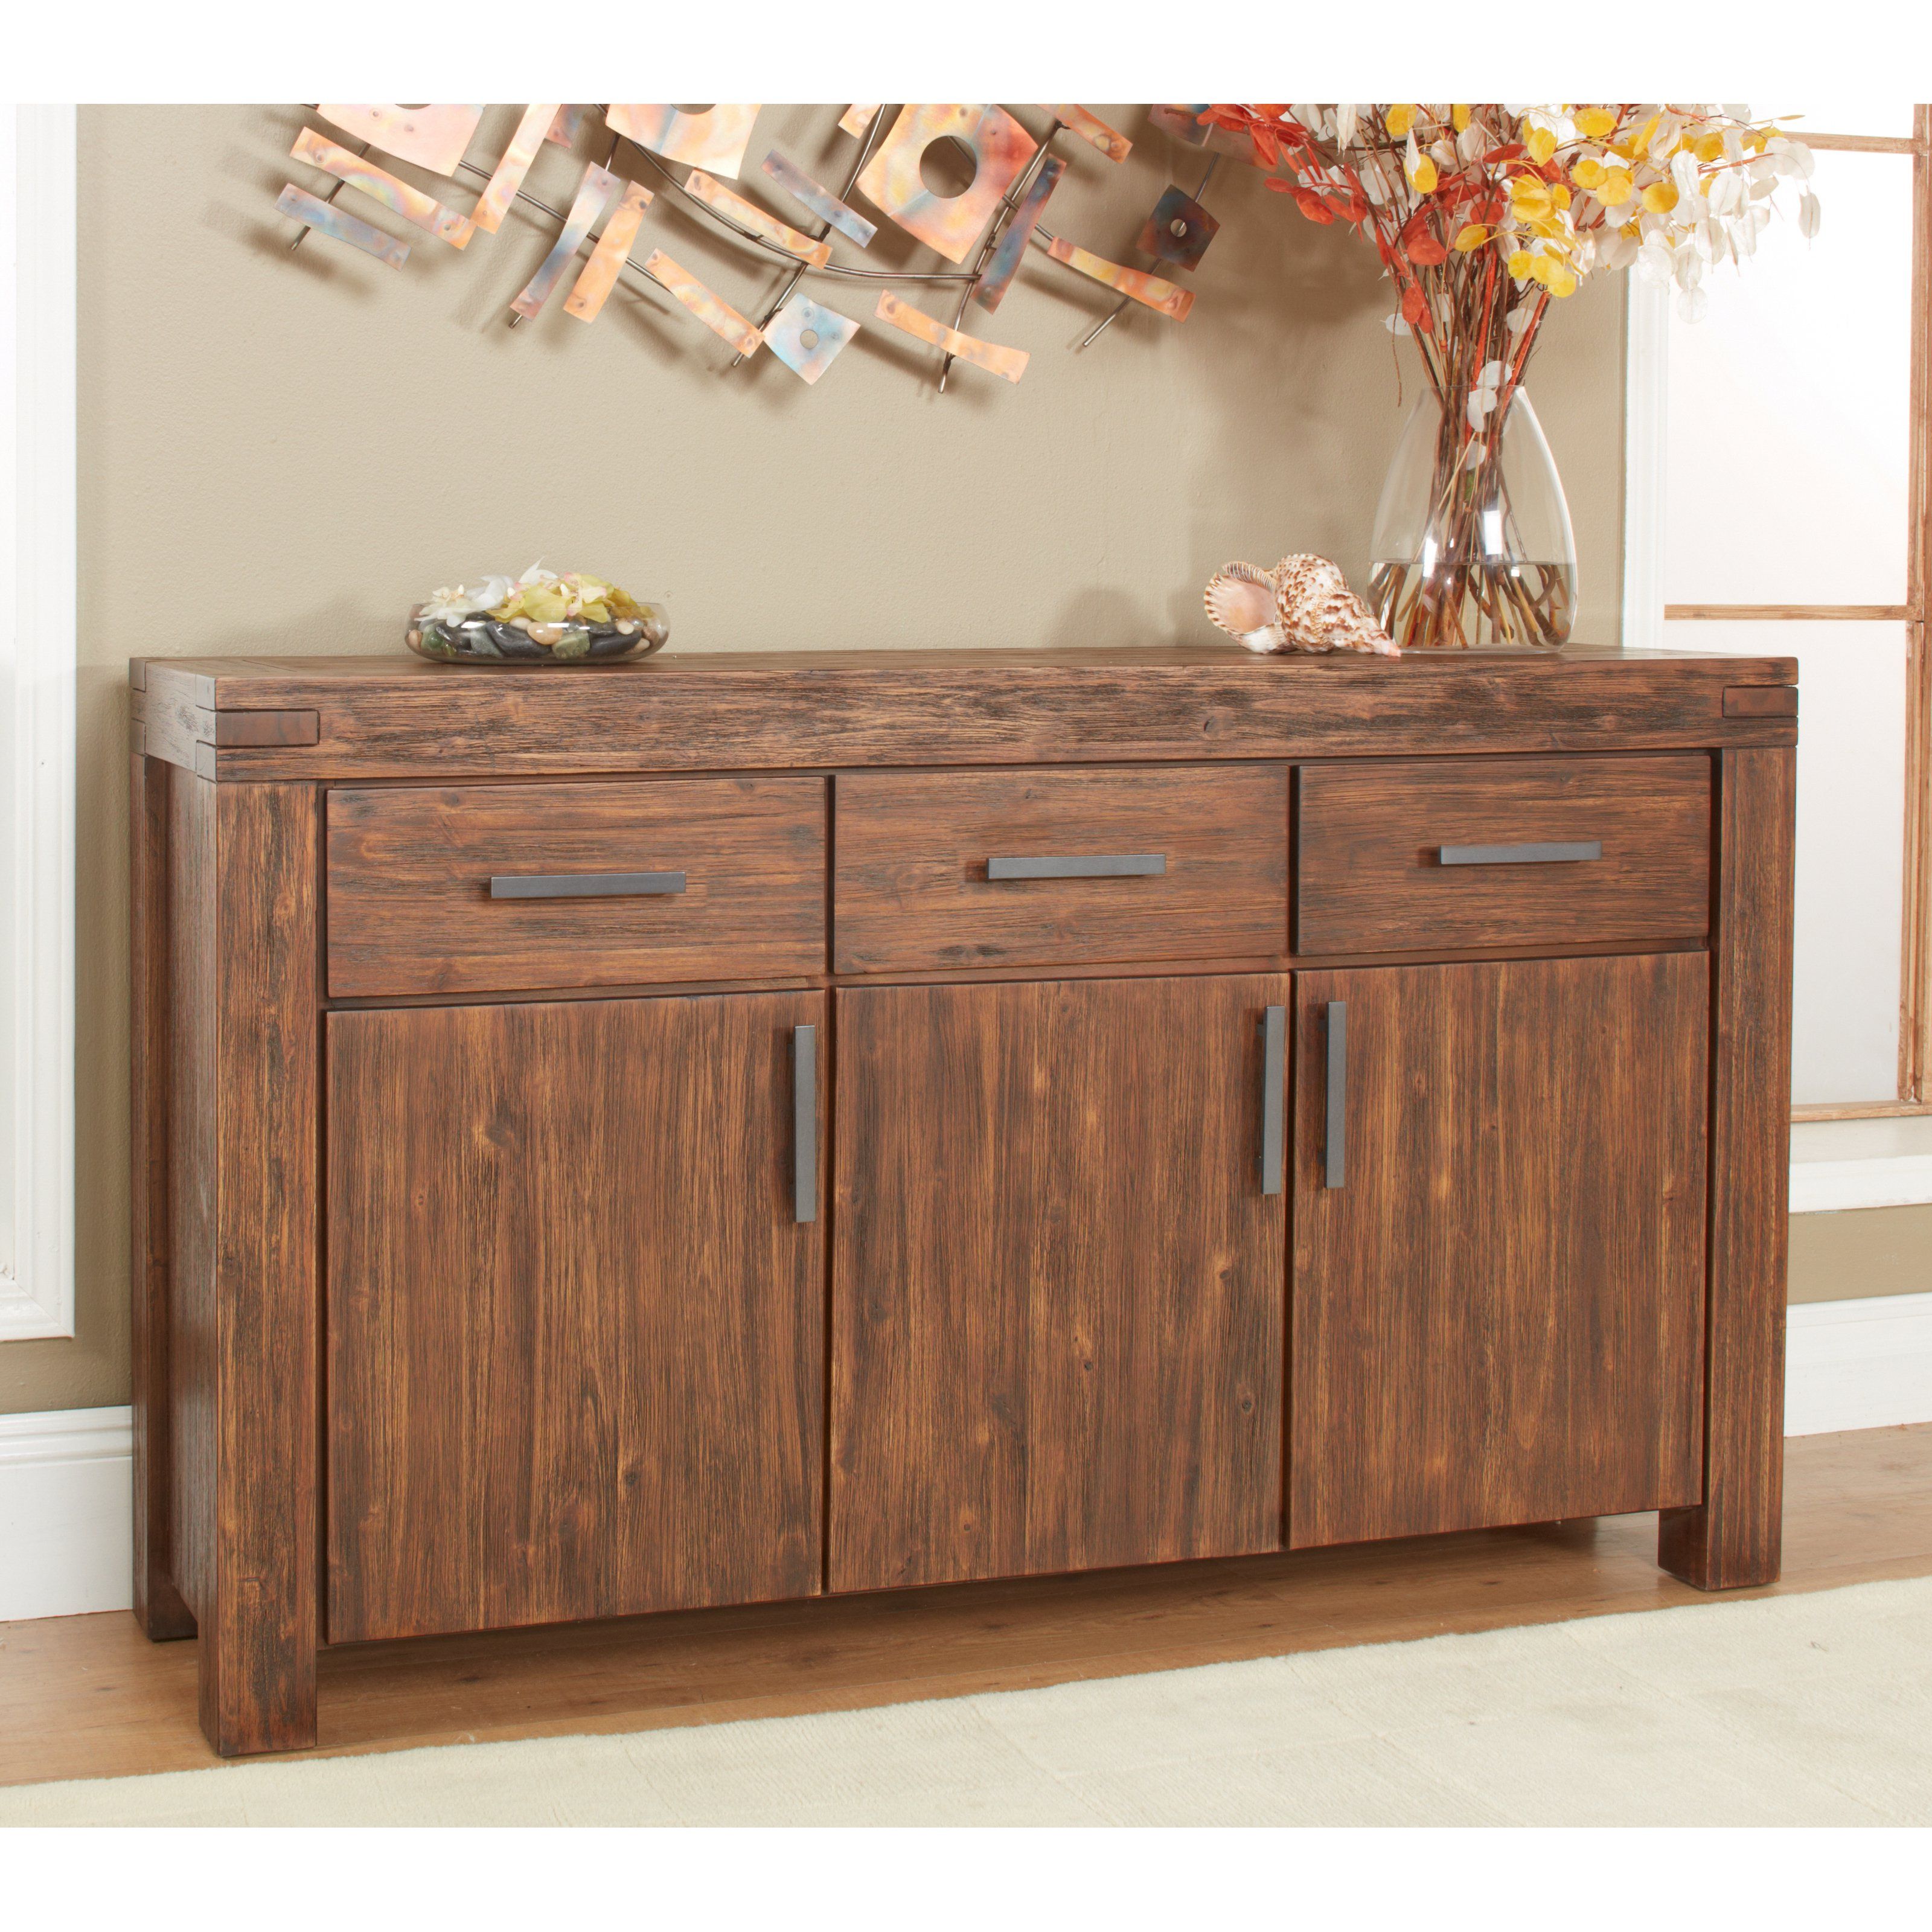 Costway Modern Kitchen Storage Cabinet Buffet Server Table Sideboard Dining  Wood White Inside Solid Wood Contemporary Sideboards Buffets (View 26 of 30)